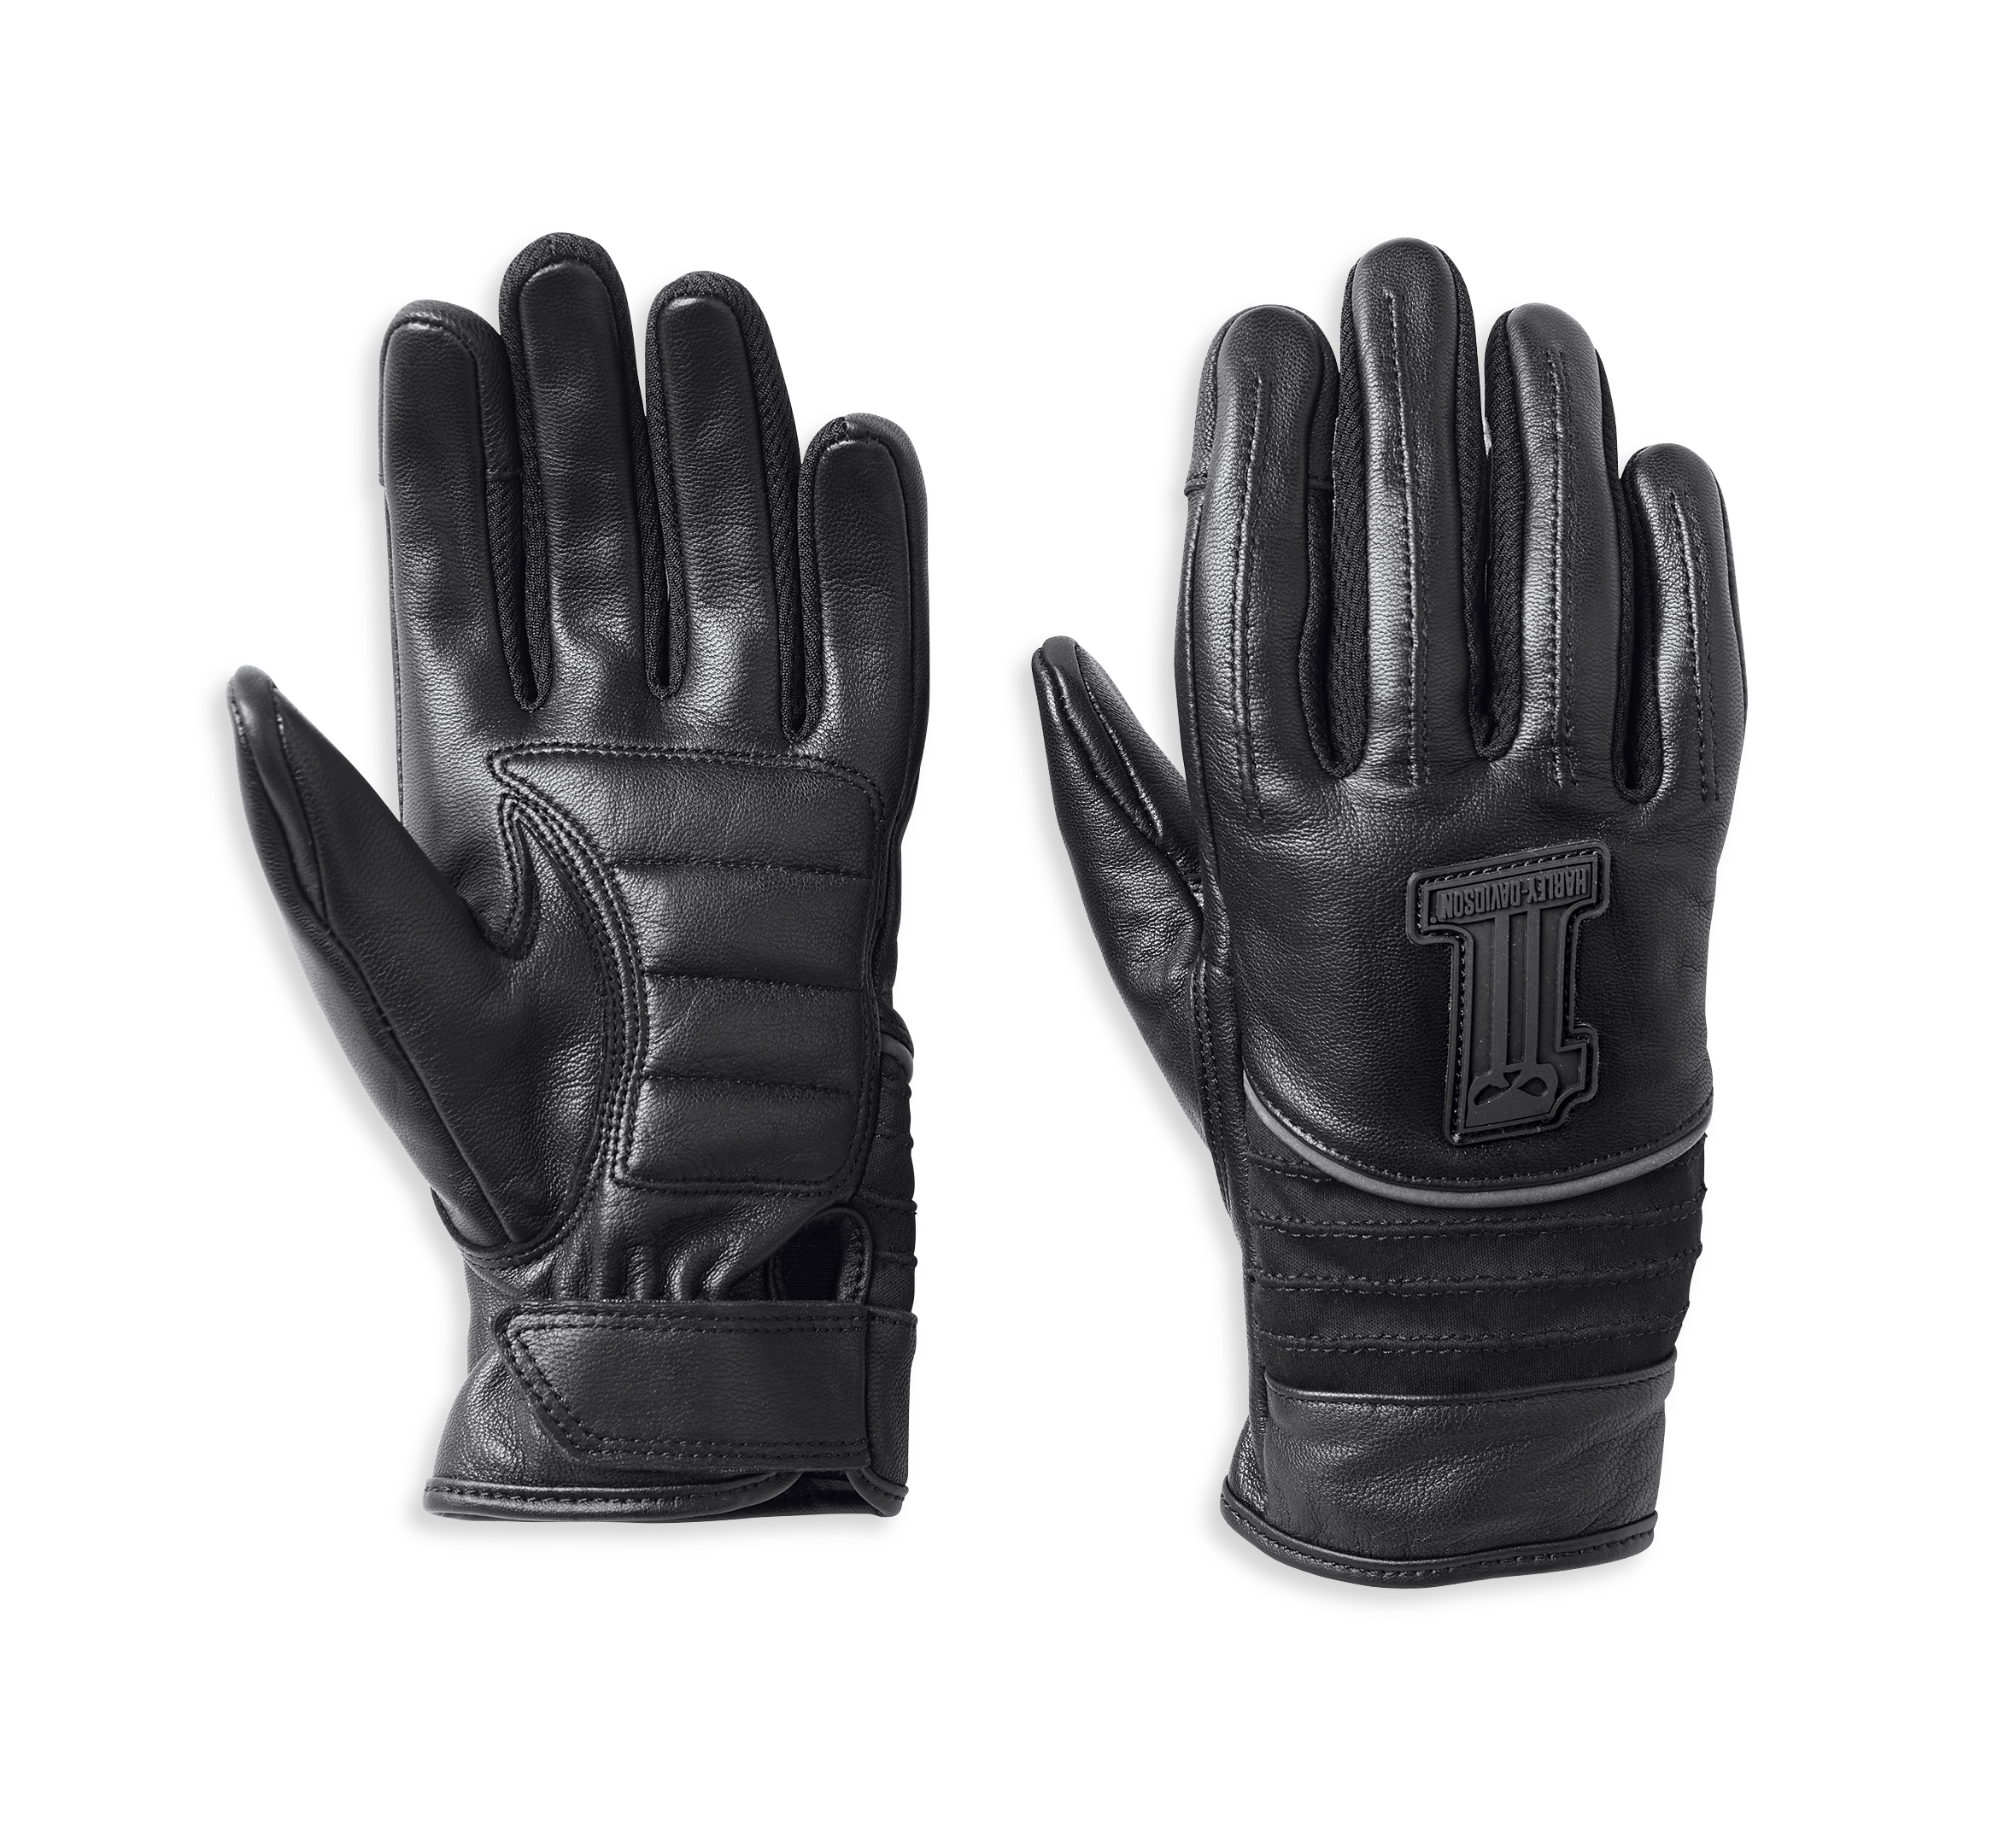 SPLAV Tactical Gloves "Road" Original Russian Army Special Forces 